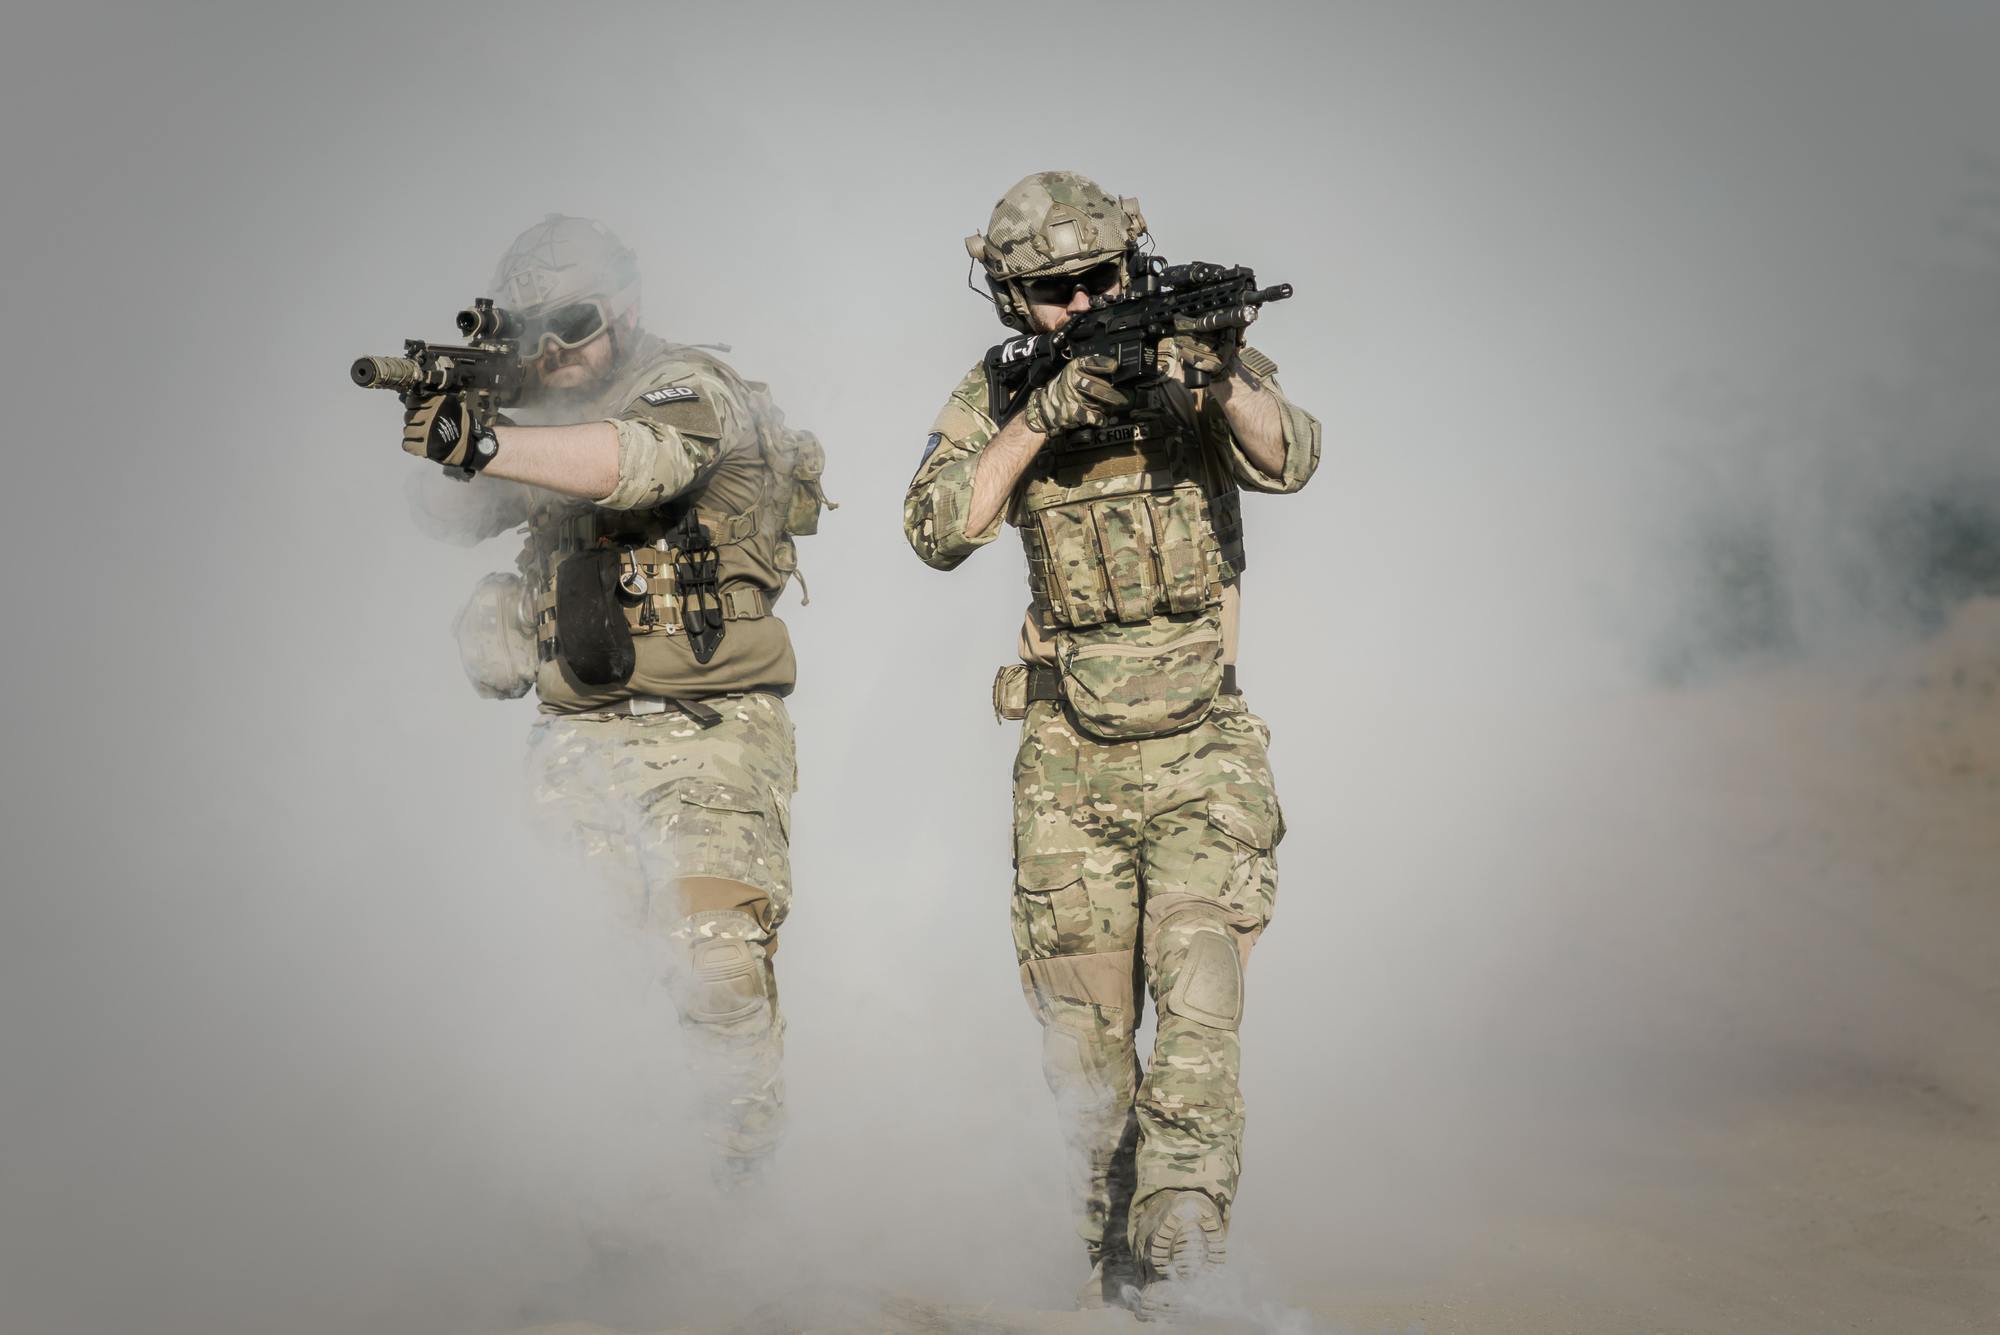 two guys doing action in army uniforms